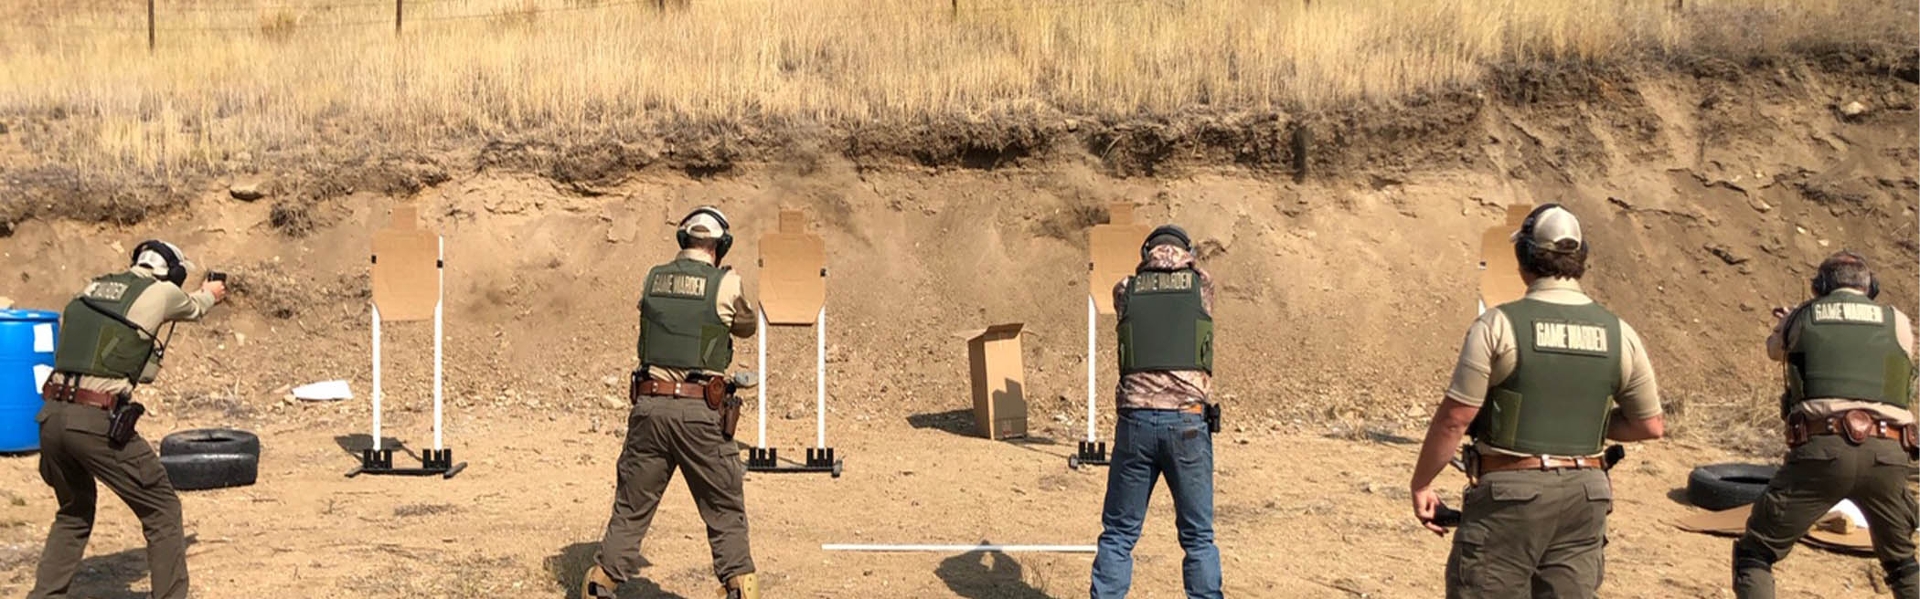 FWP Game Wardens training by shooting targets